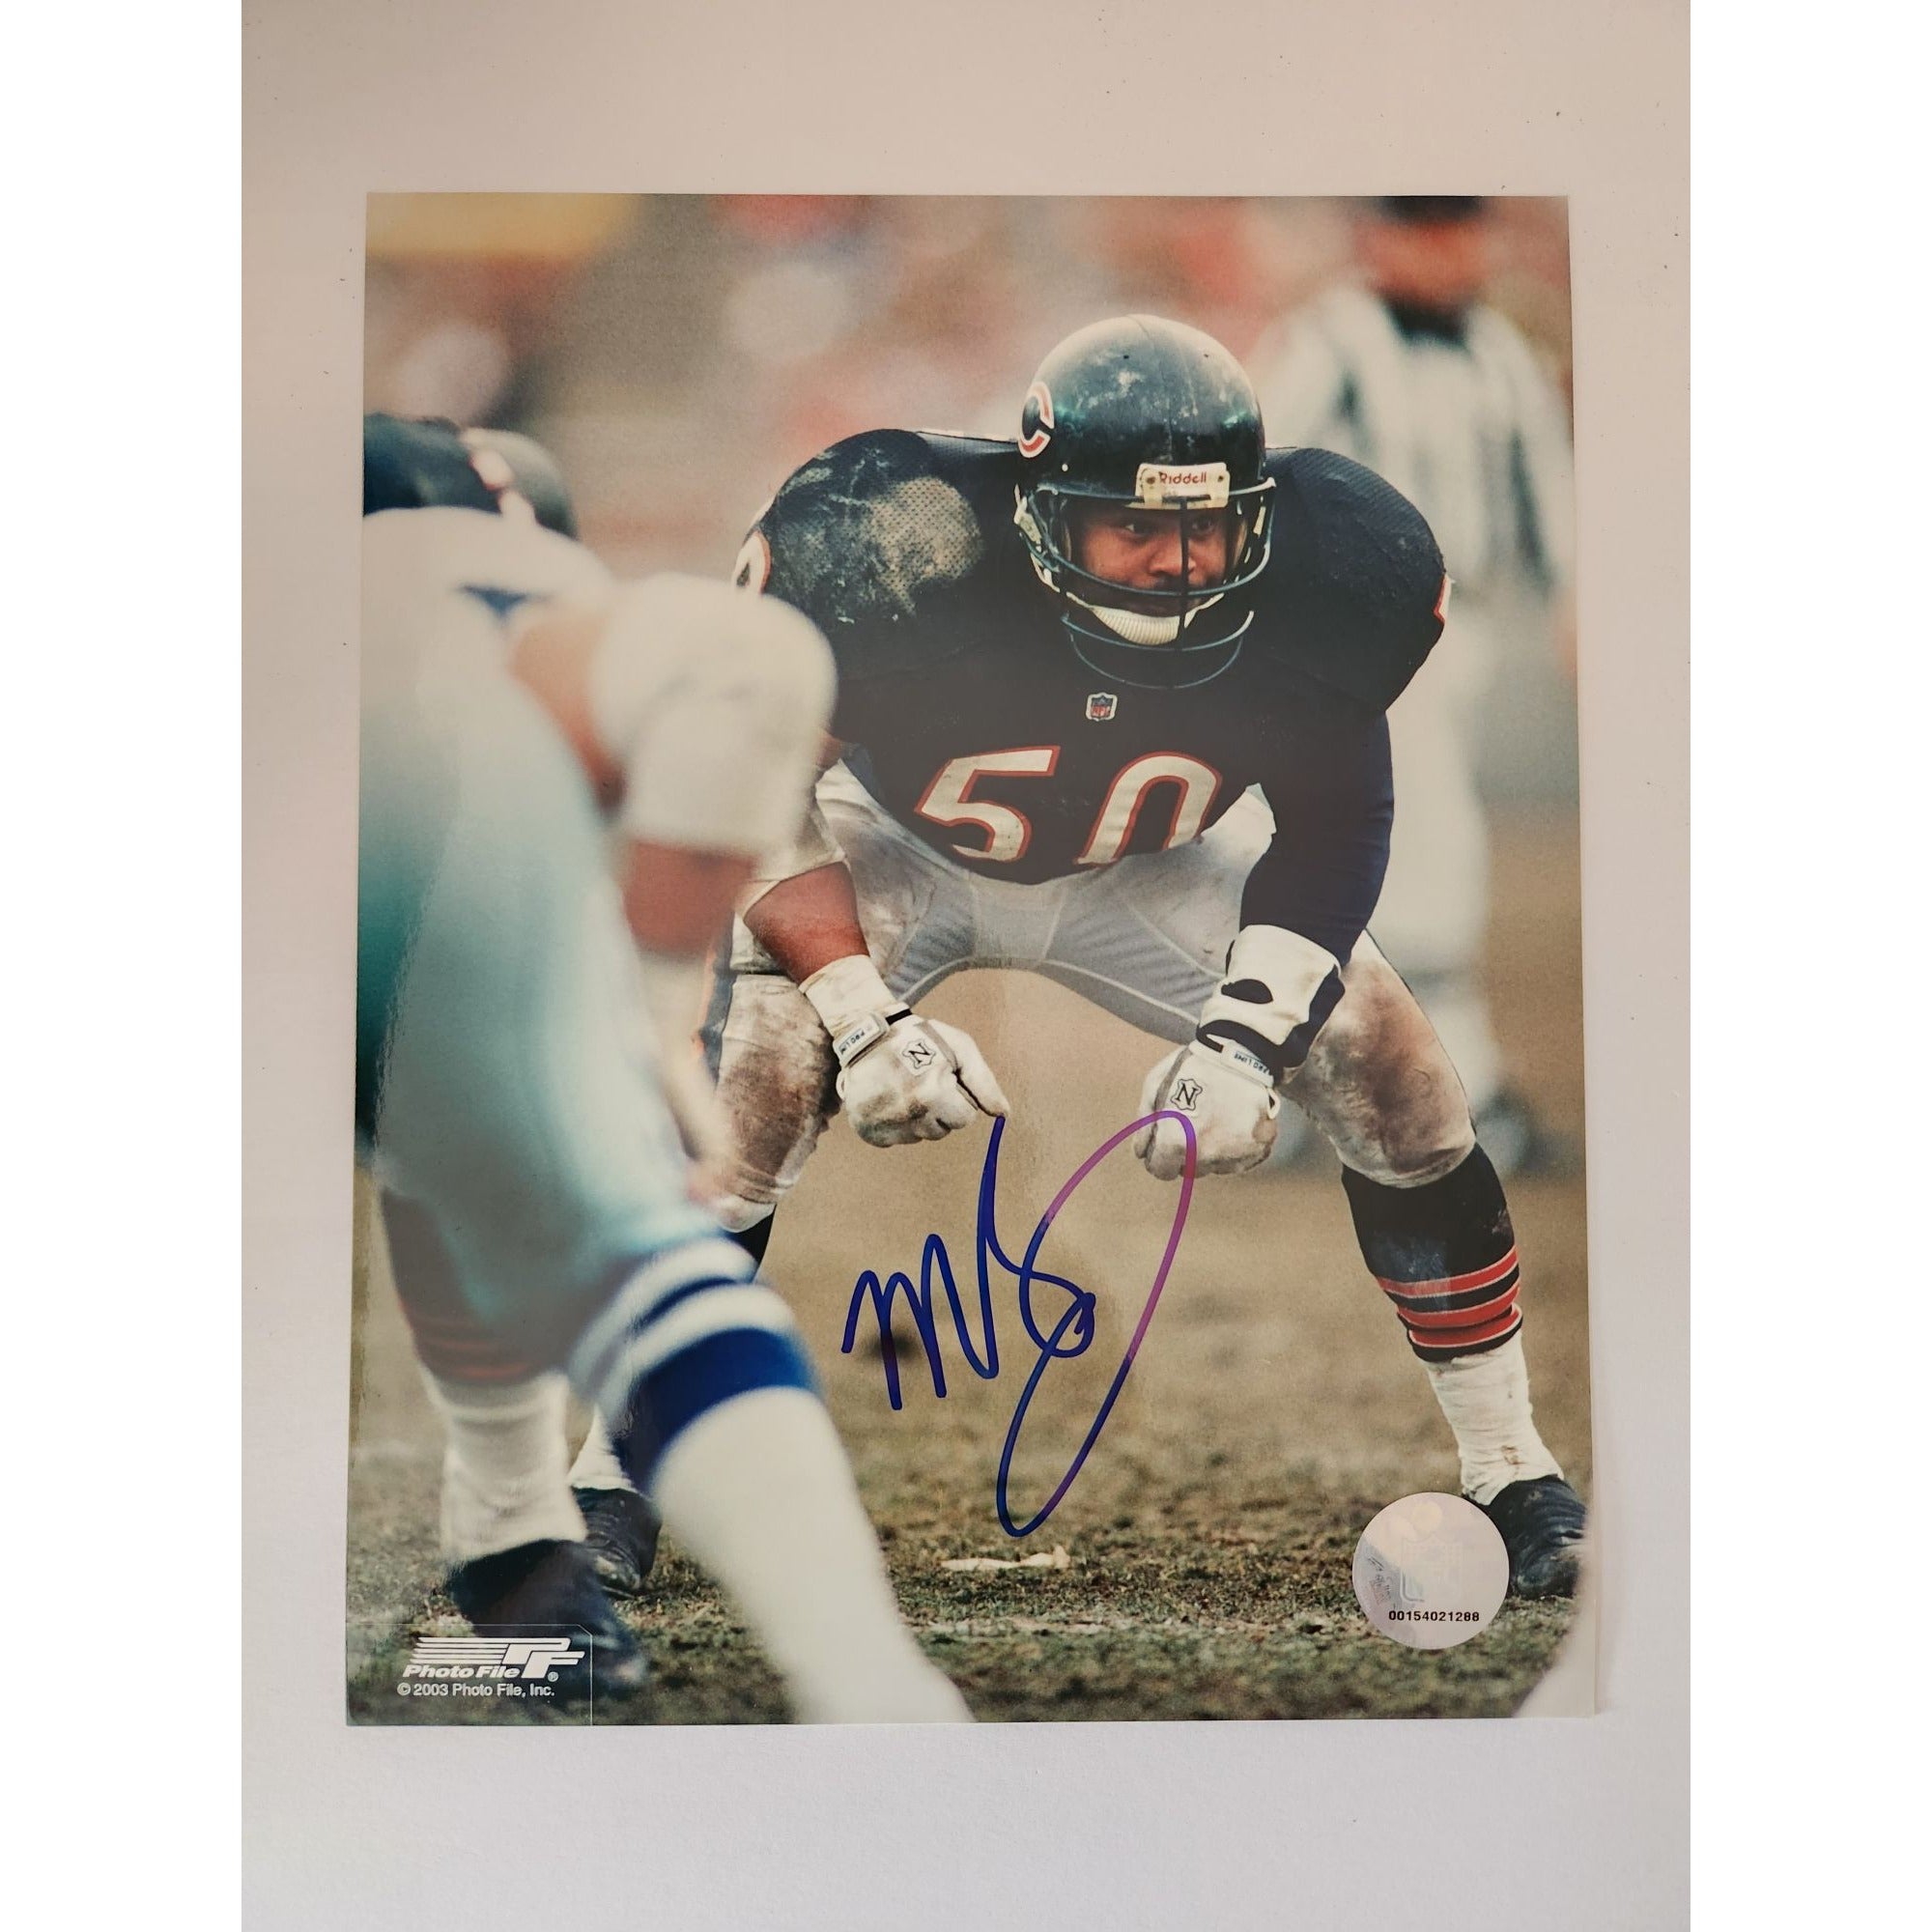 Mike Singletary Chicago Bears Hall of Famer 8x10 photo signed